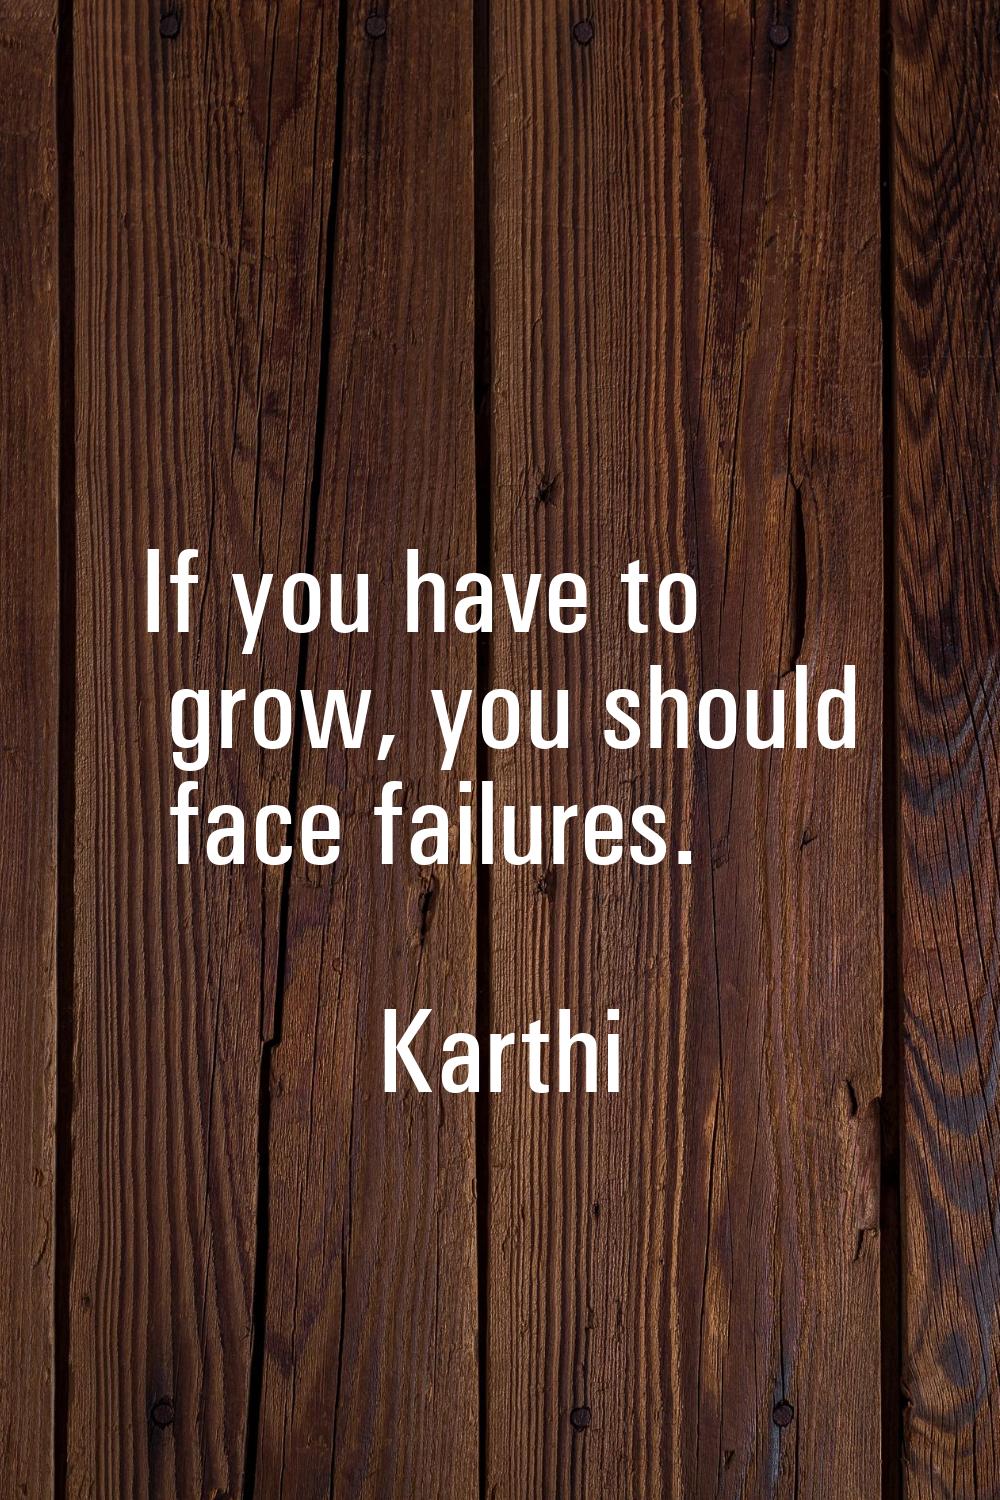 If you have to grow, you should face failures.